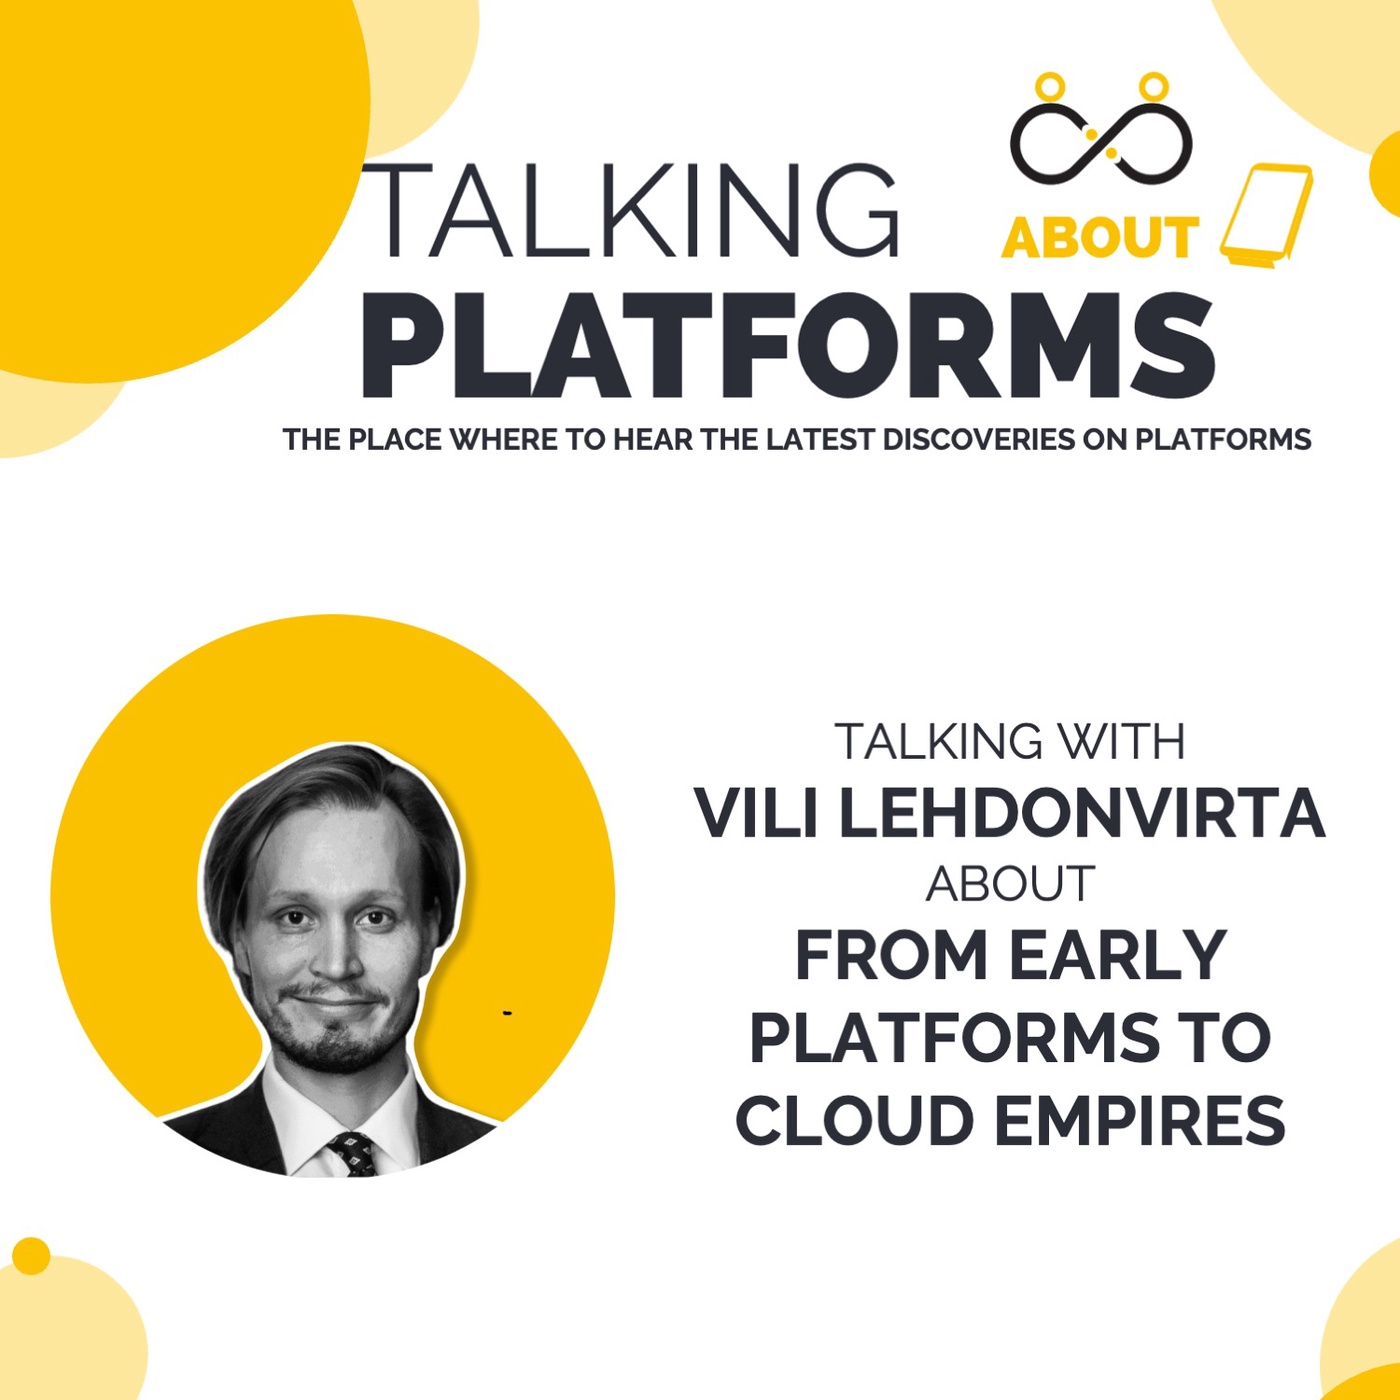 From early platforms to cloud empires with Vili Lehdonvirta